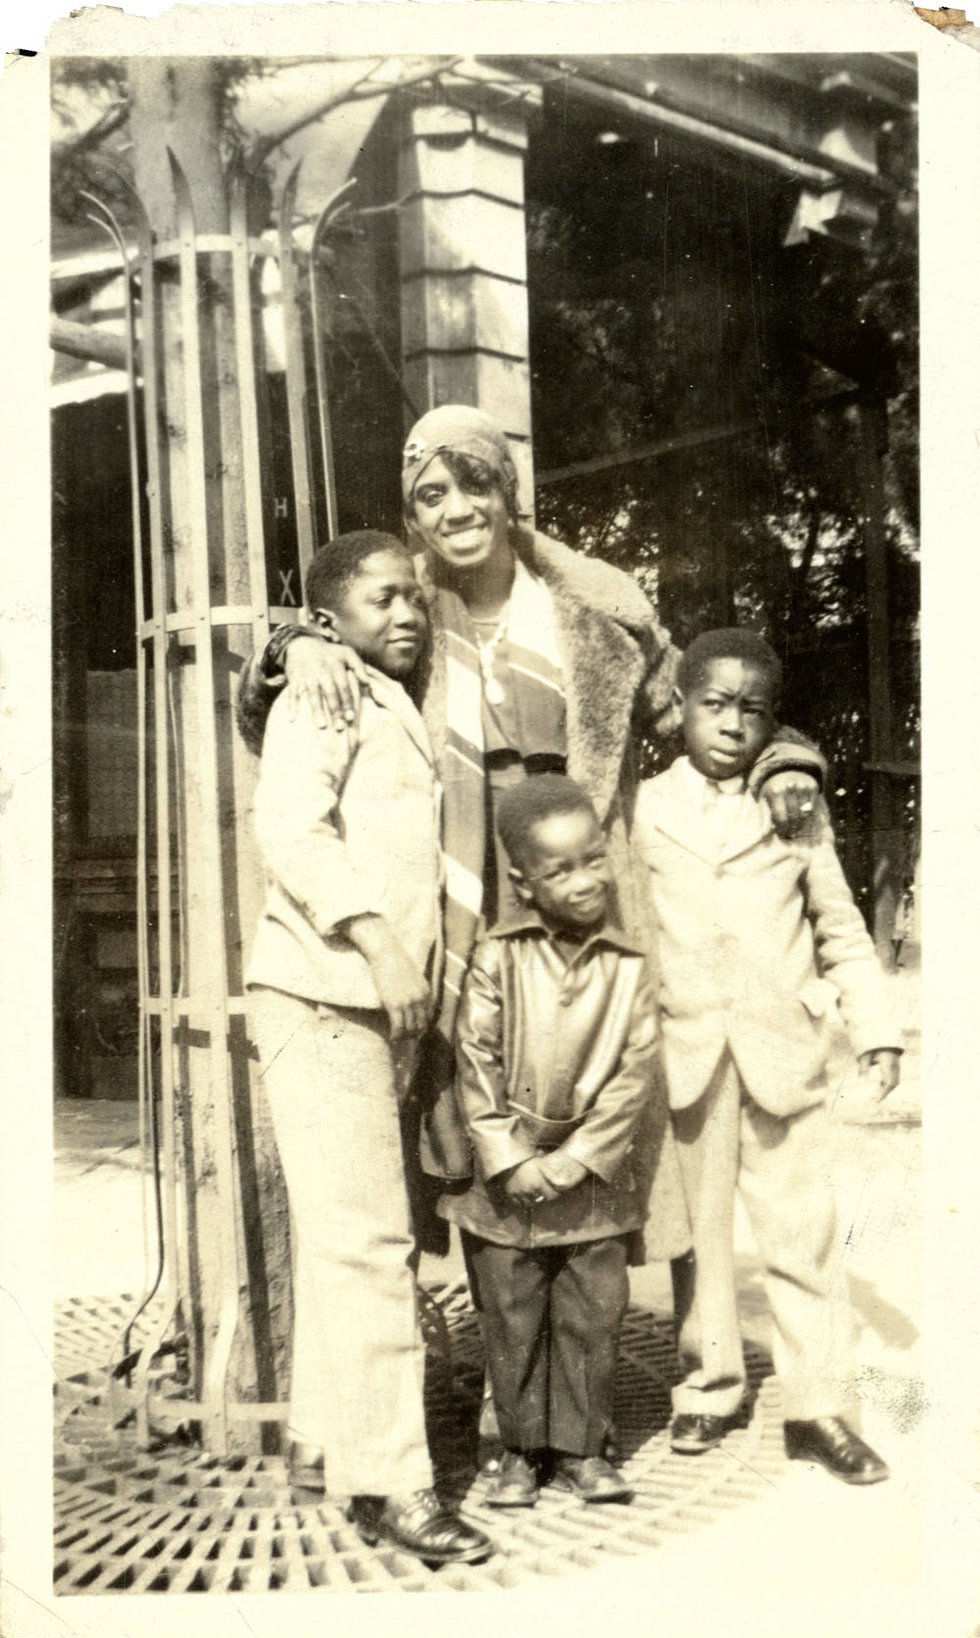 Cast members enjoy their 1929 visit to California, though the exact location has not been identified. The children are (left to right) Milton Dickerson, Walter Tait, and Robert “Bones” Couch. 